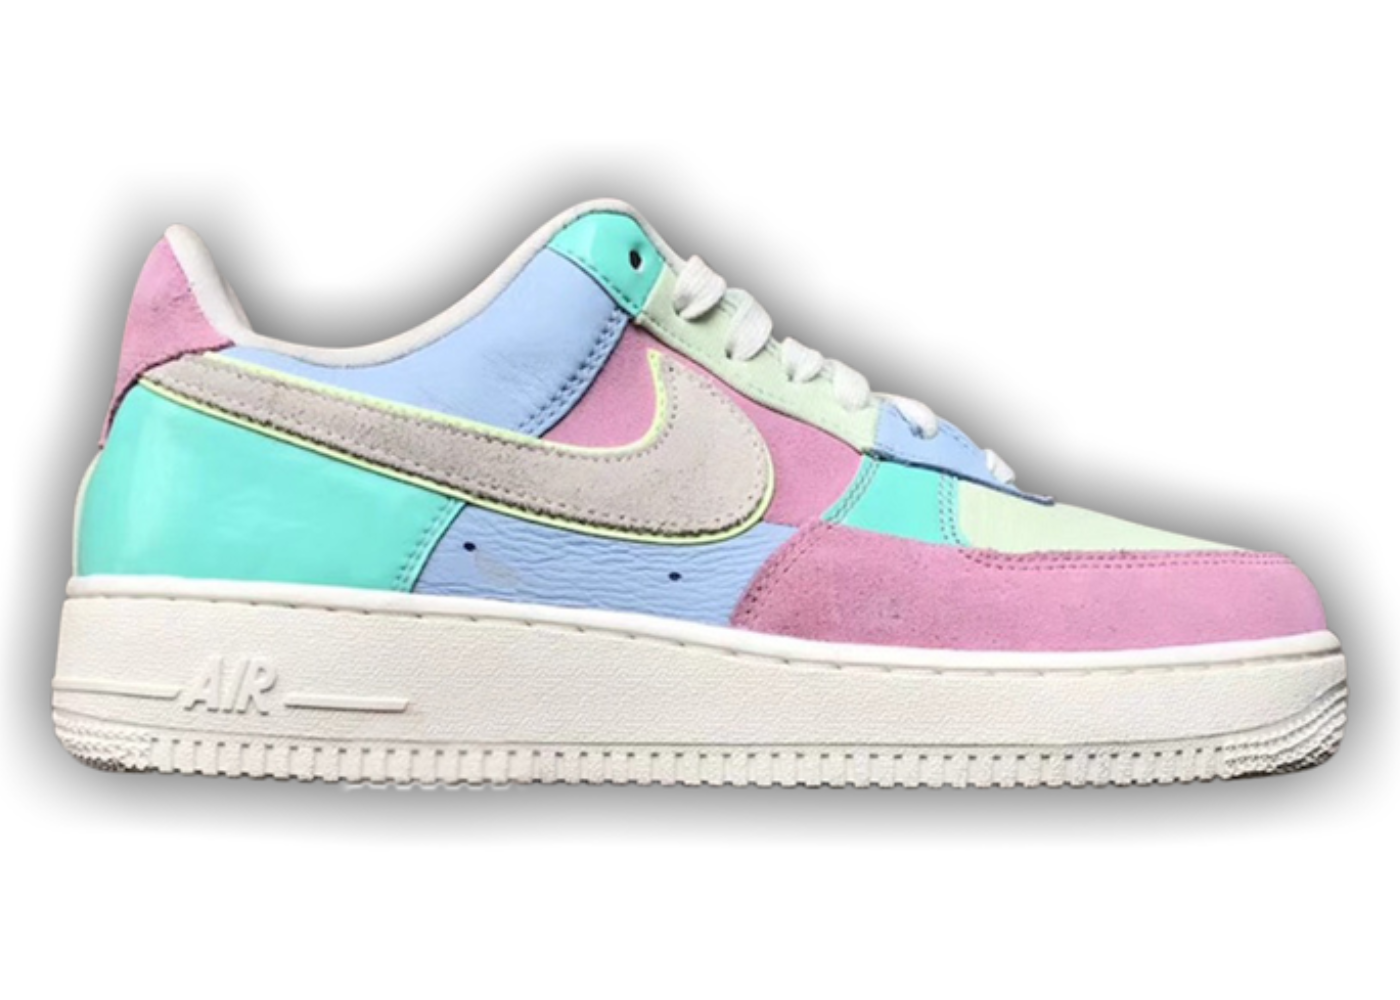 Nike Air Force 1 Low Easter 2018